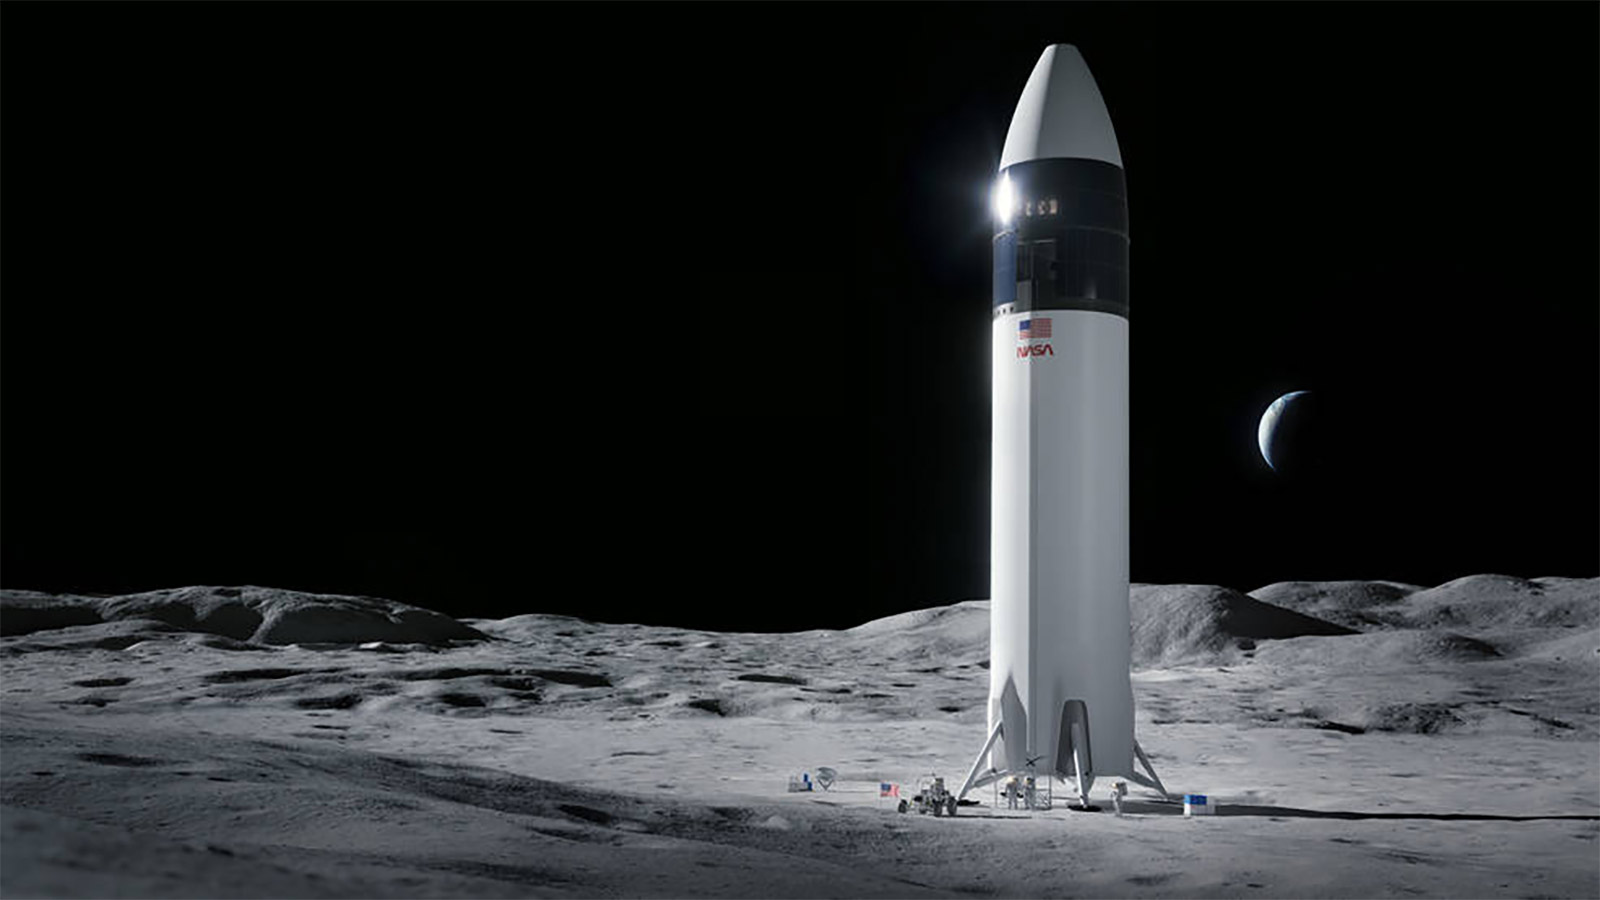 A SpaceX Rendering Of Its Starship Lunar Lander On The Moon With American Astronauts On The Moon's Surface